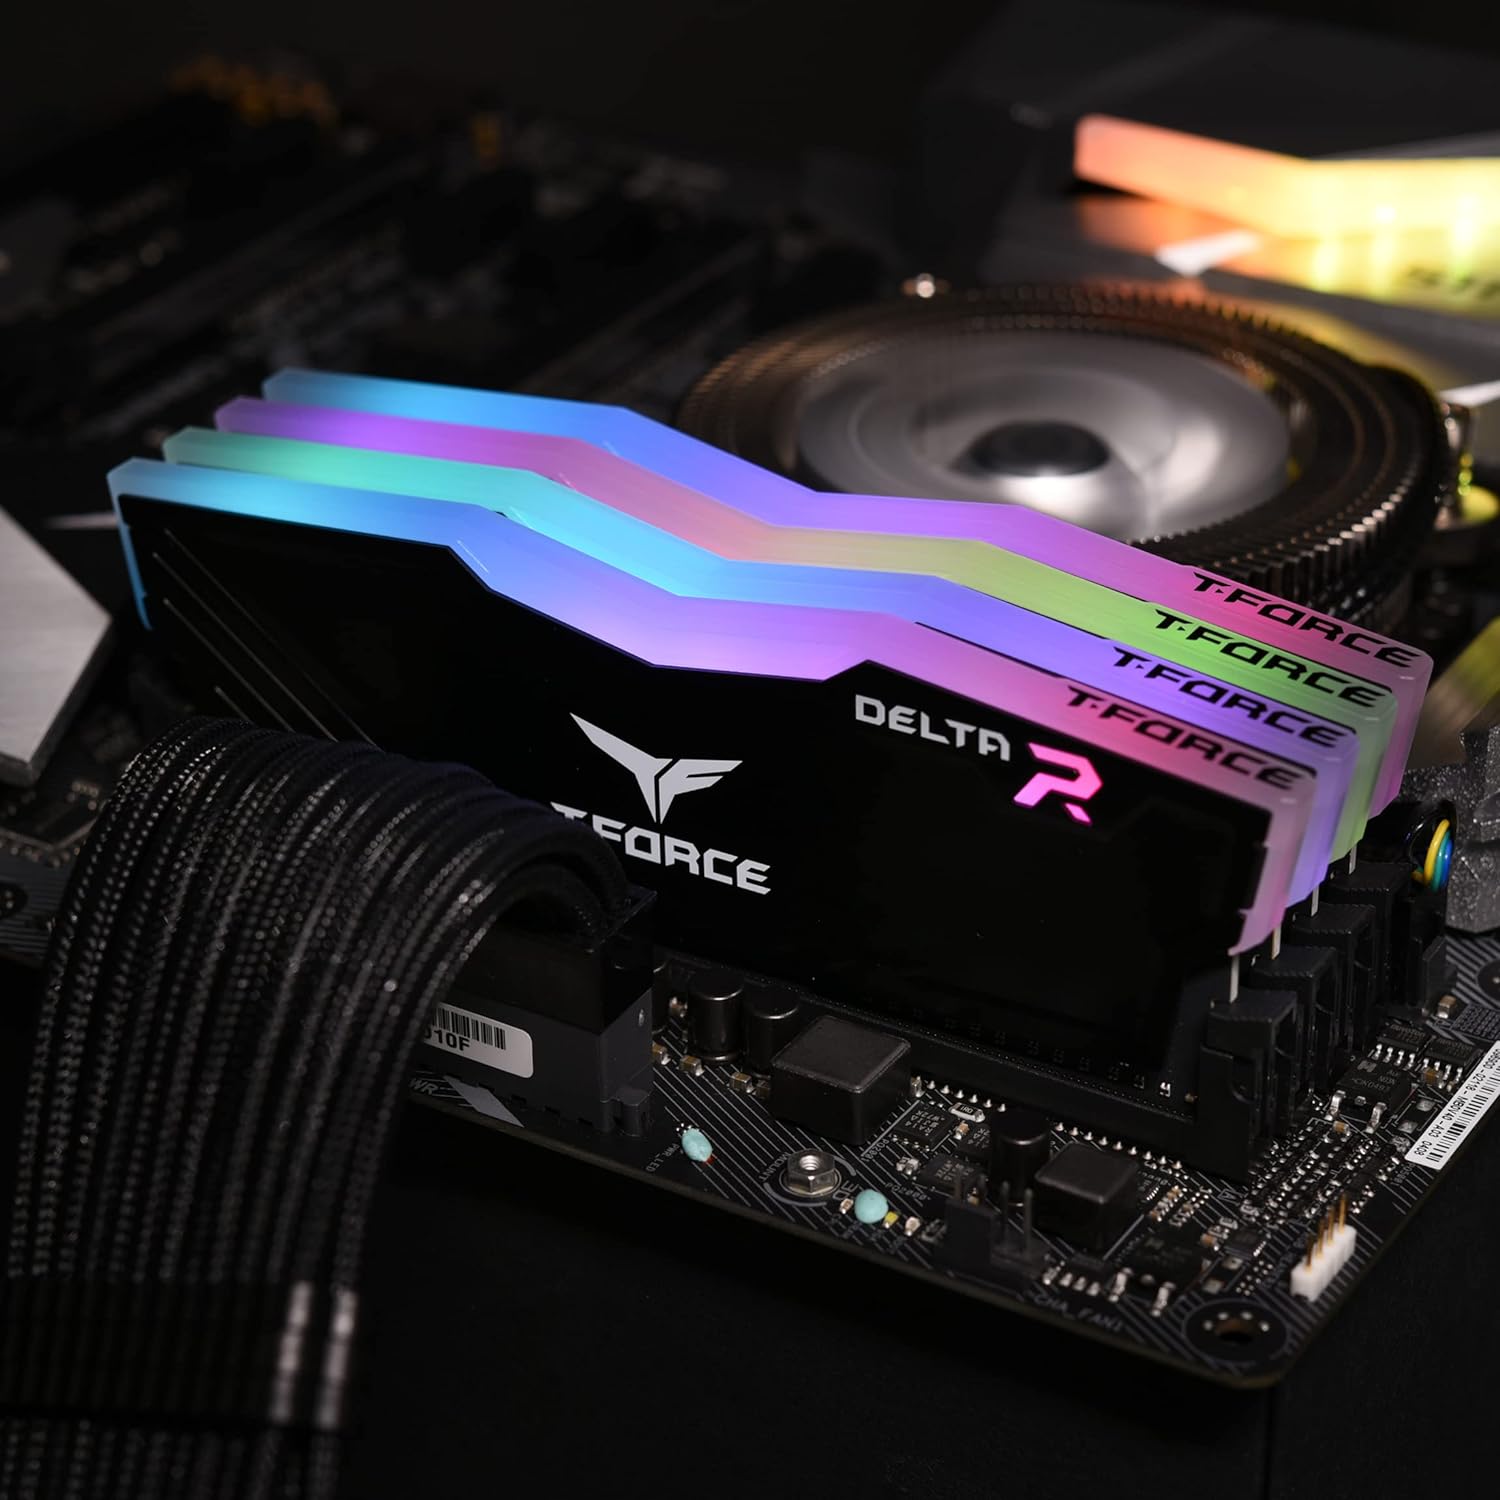 Enhance Your System with TeamGroup Delta RGB DDR4 16GB RAM - Black 0765441643284